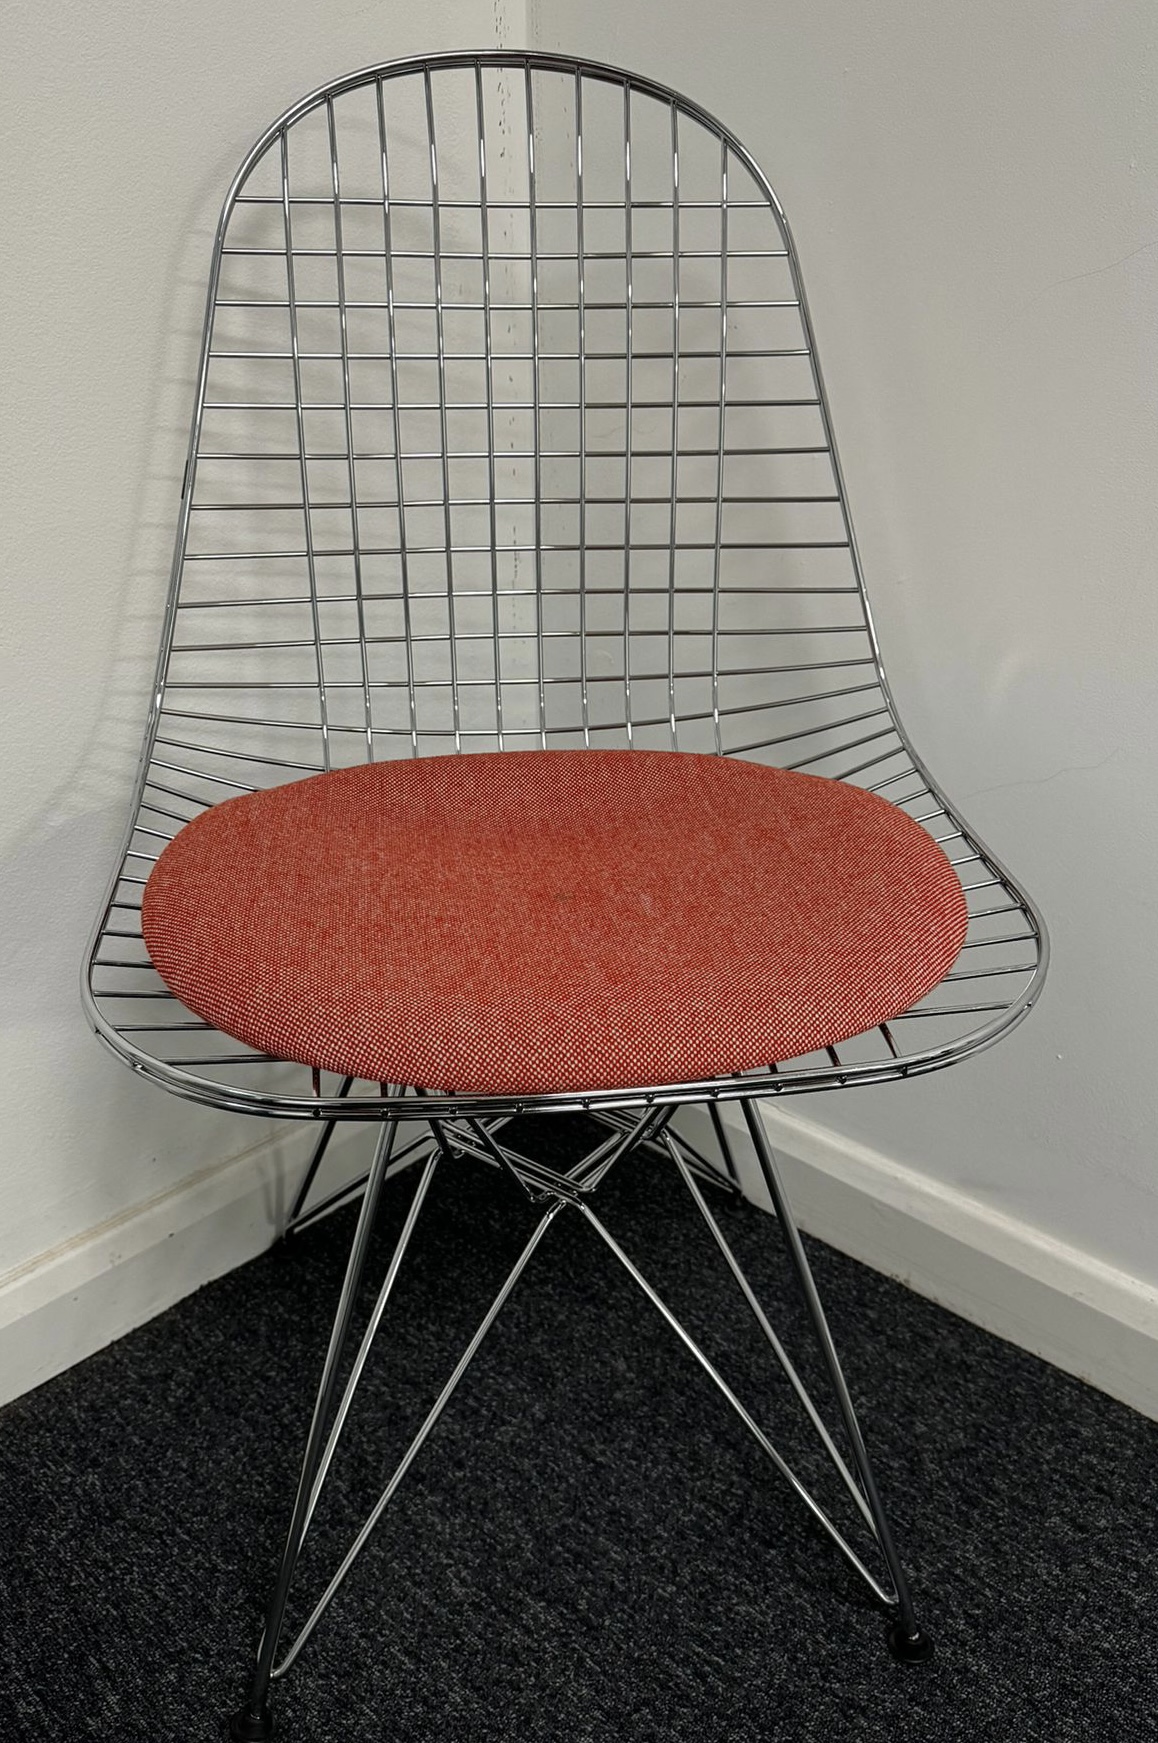 Vitra DKR wire chair